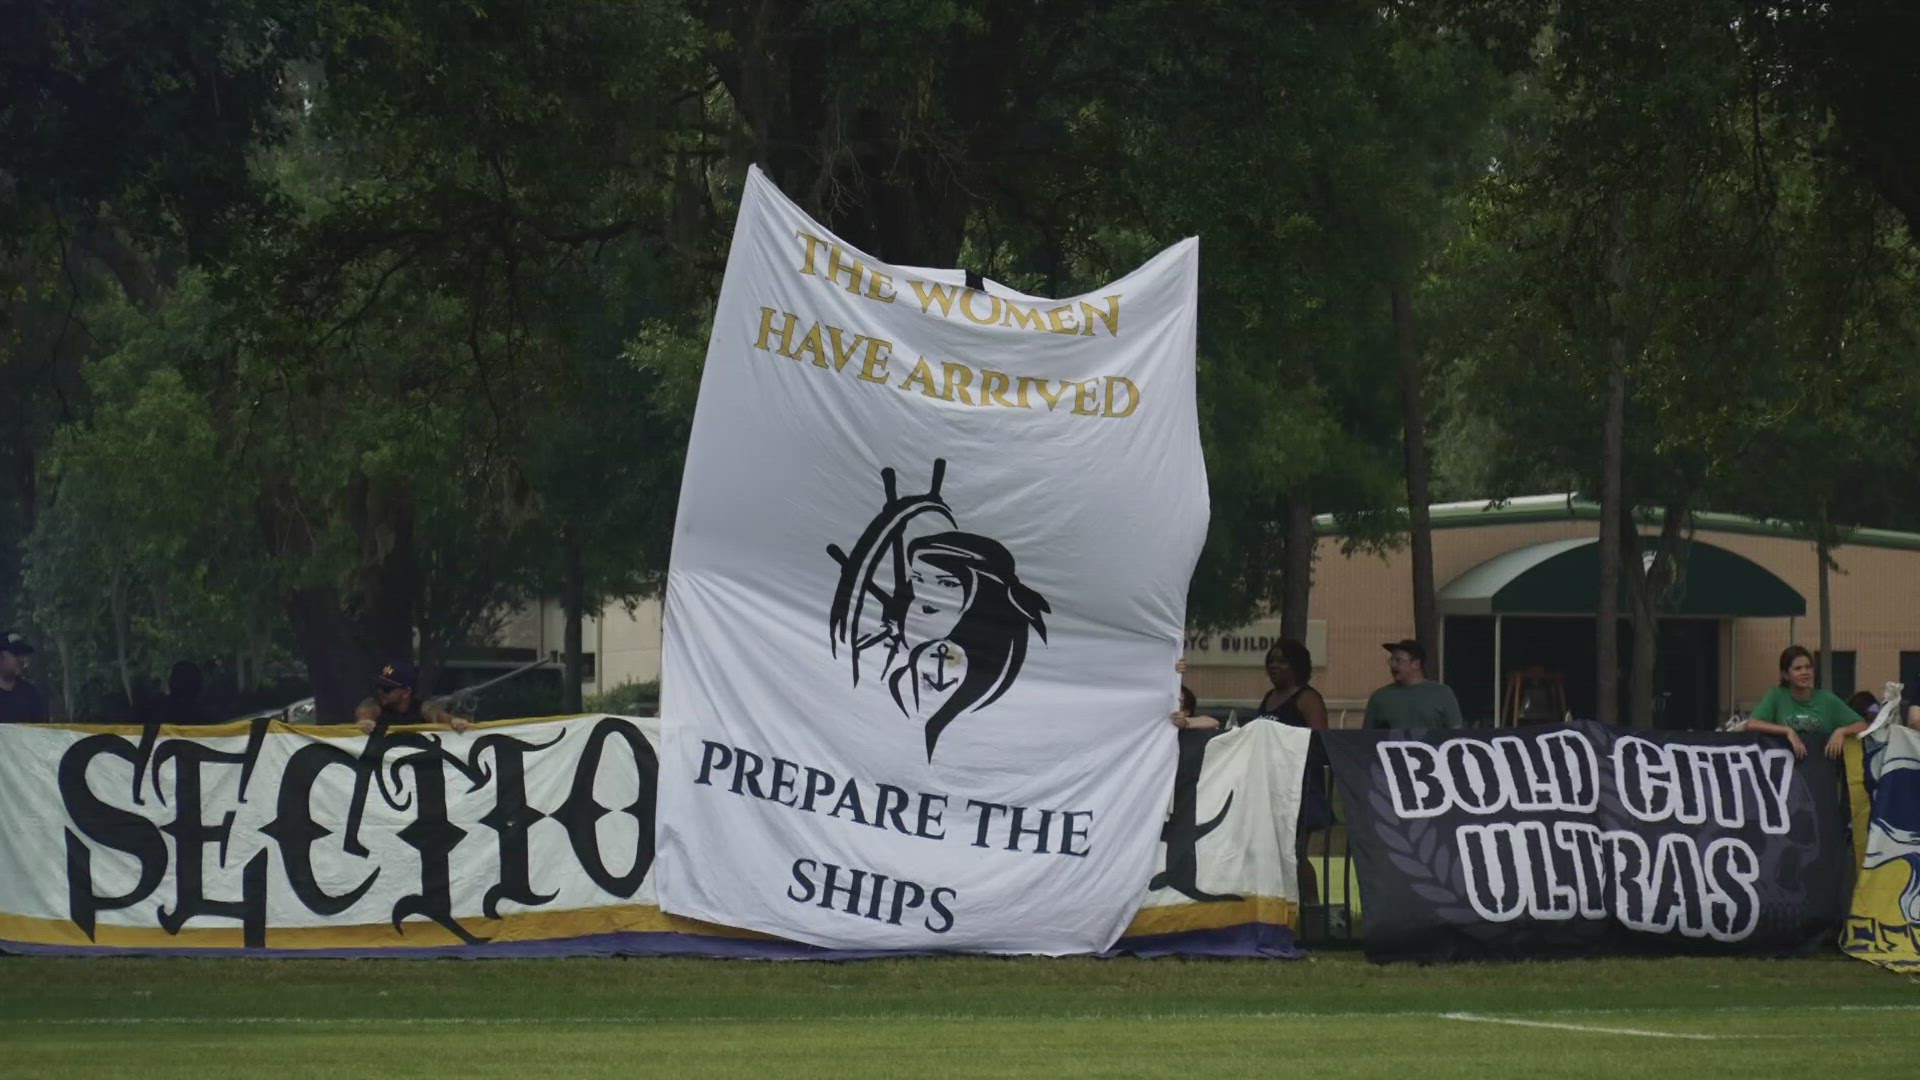 Less than two months ago, the Jacksonville Armada announced the addition of a women's team. Since their establishment, their fan base has only grown.